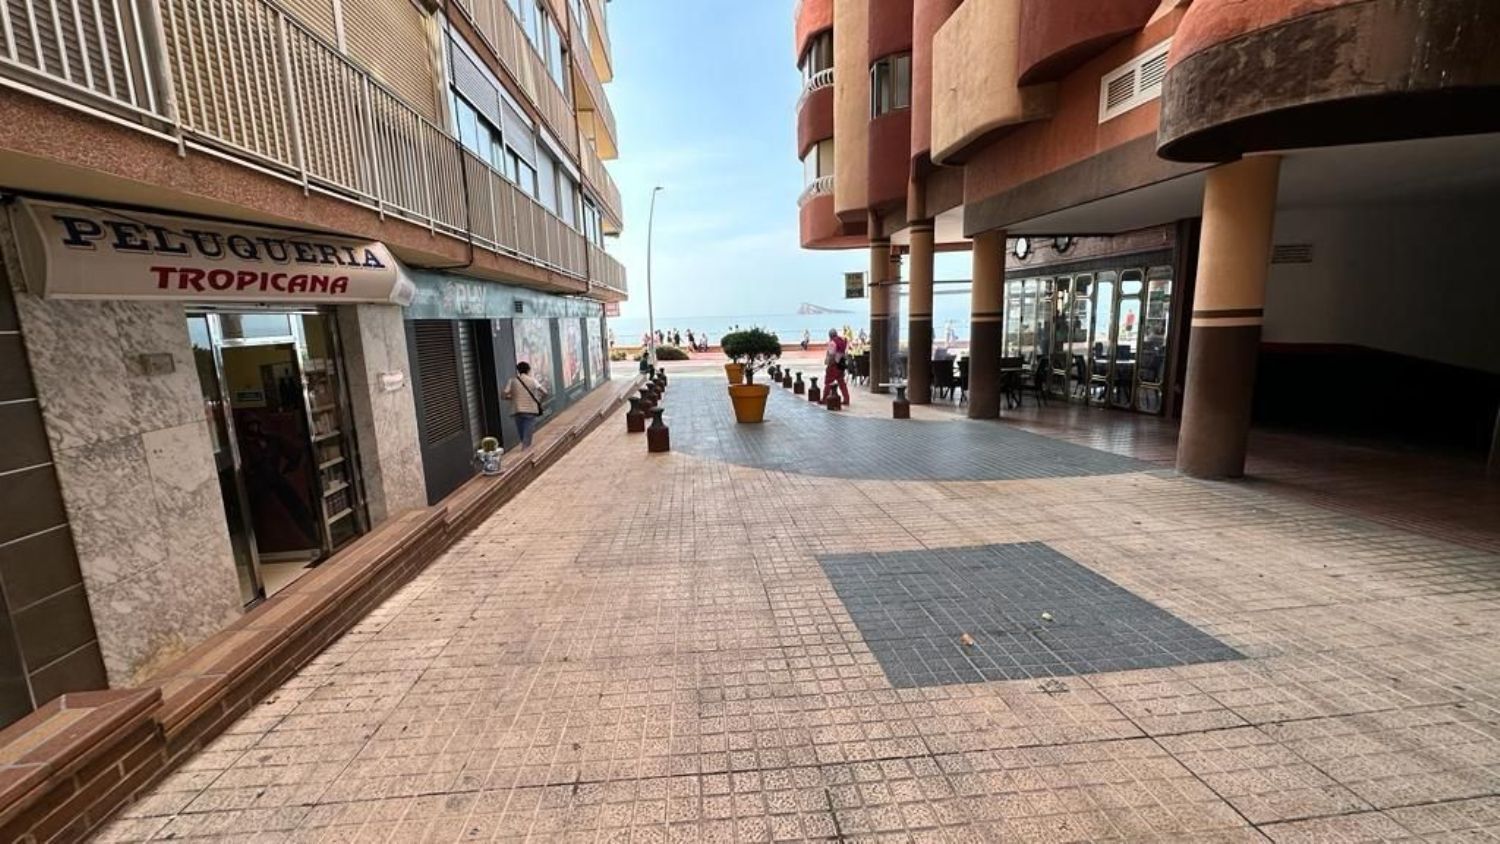 Flat for sale on the seafront in Pasaje Rosaleda, in Benidorm